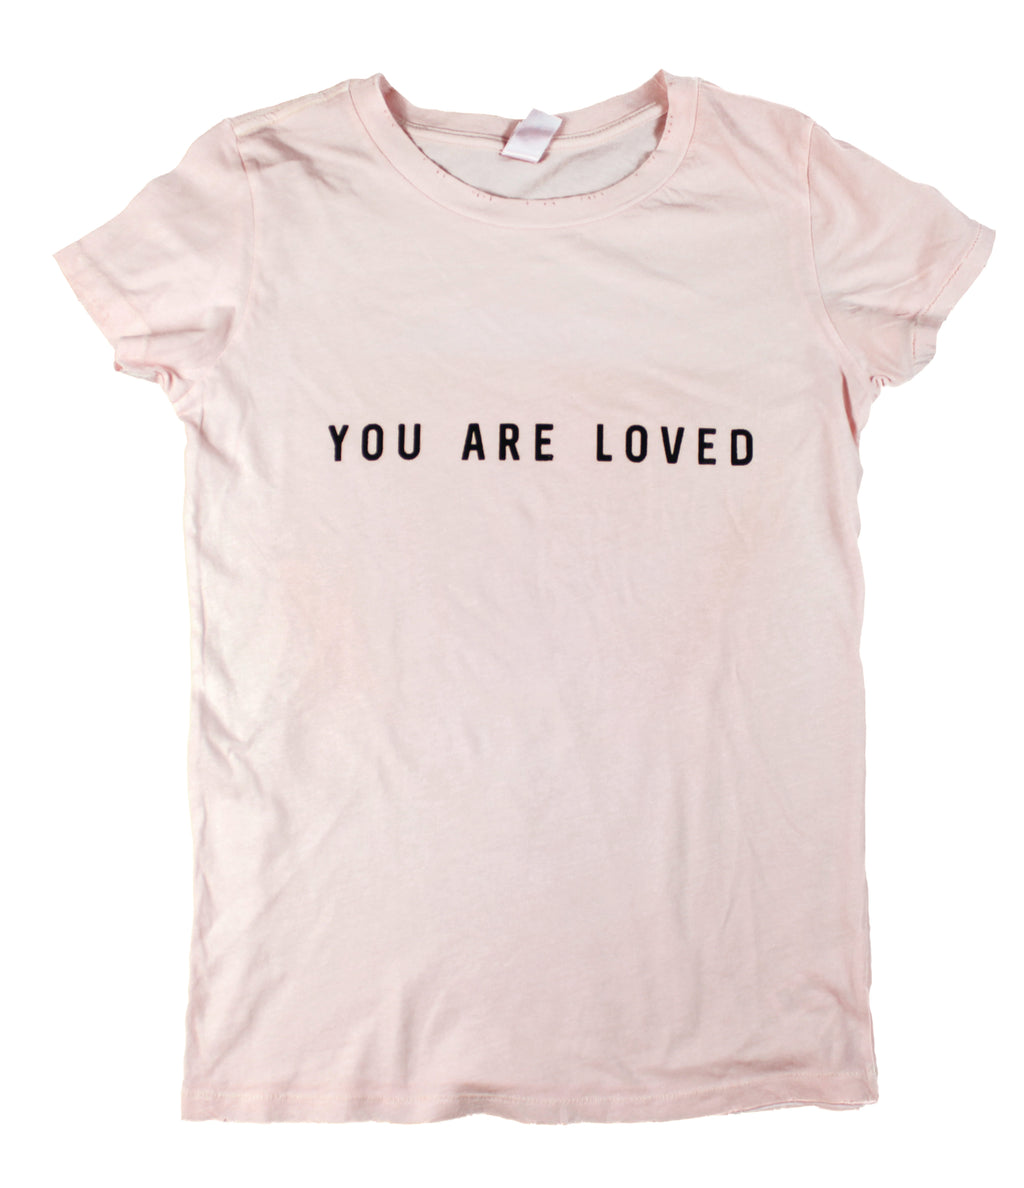 YOU ARE LOVED BLUSH PIGMENT DYED DISTRESSED WOMEN'S RELAXED T-SHIRT